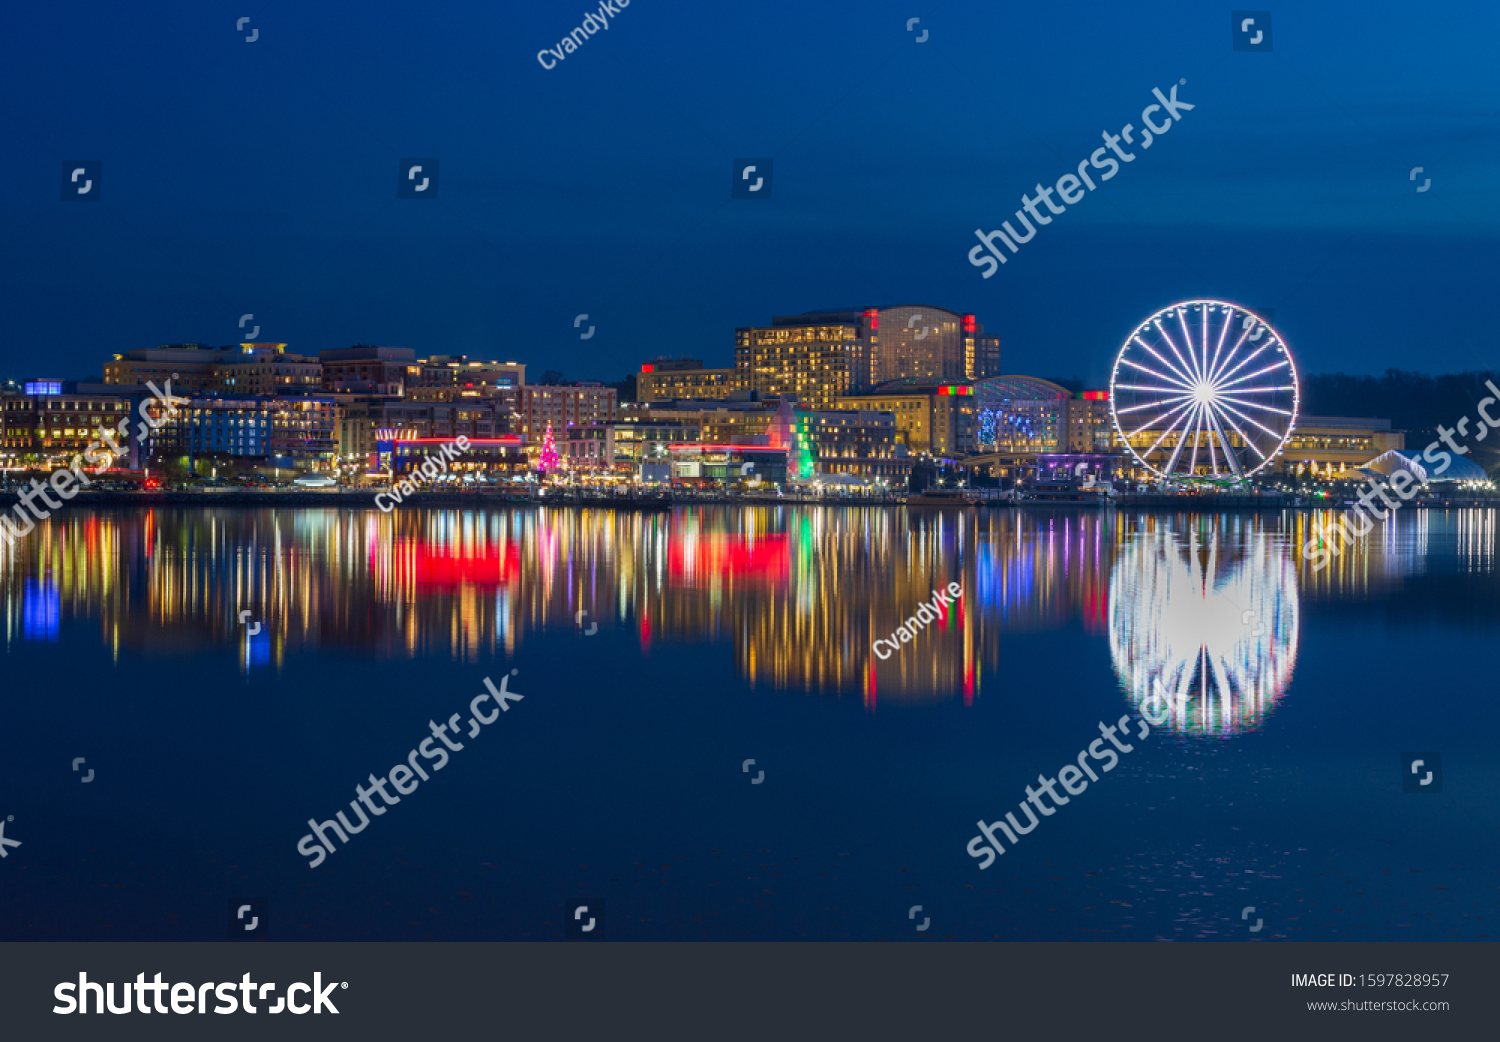 Skyline of the National Harbor illuminated waterfront, a tourist attraction on the banks of the historic Potomac River in Prince Georges County Maryland.